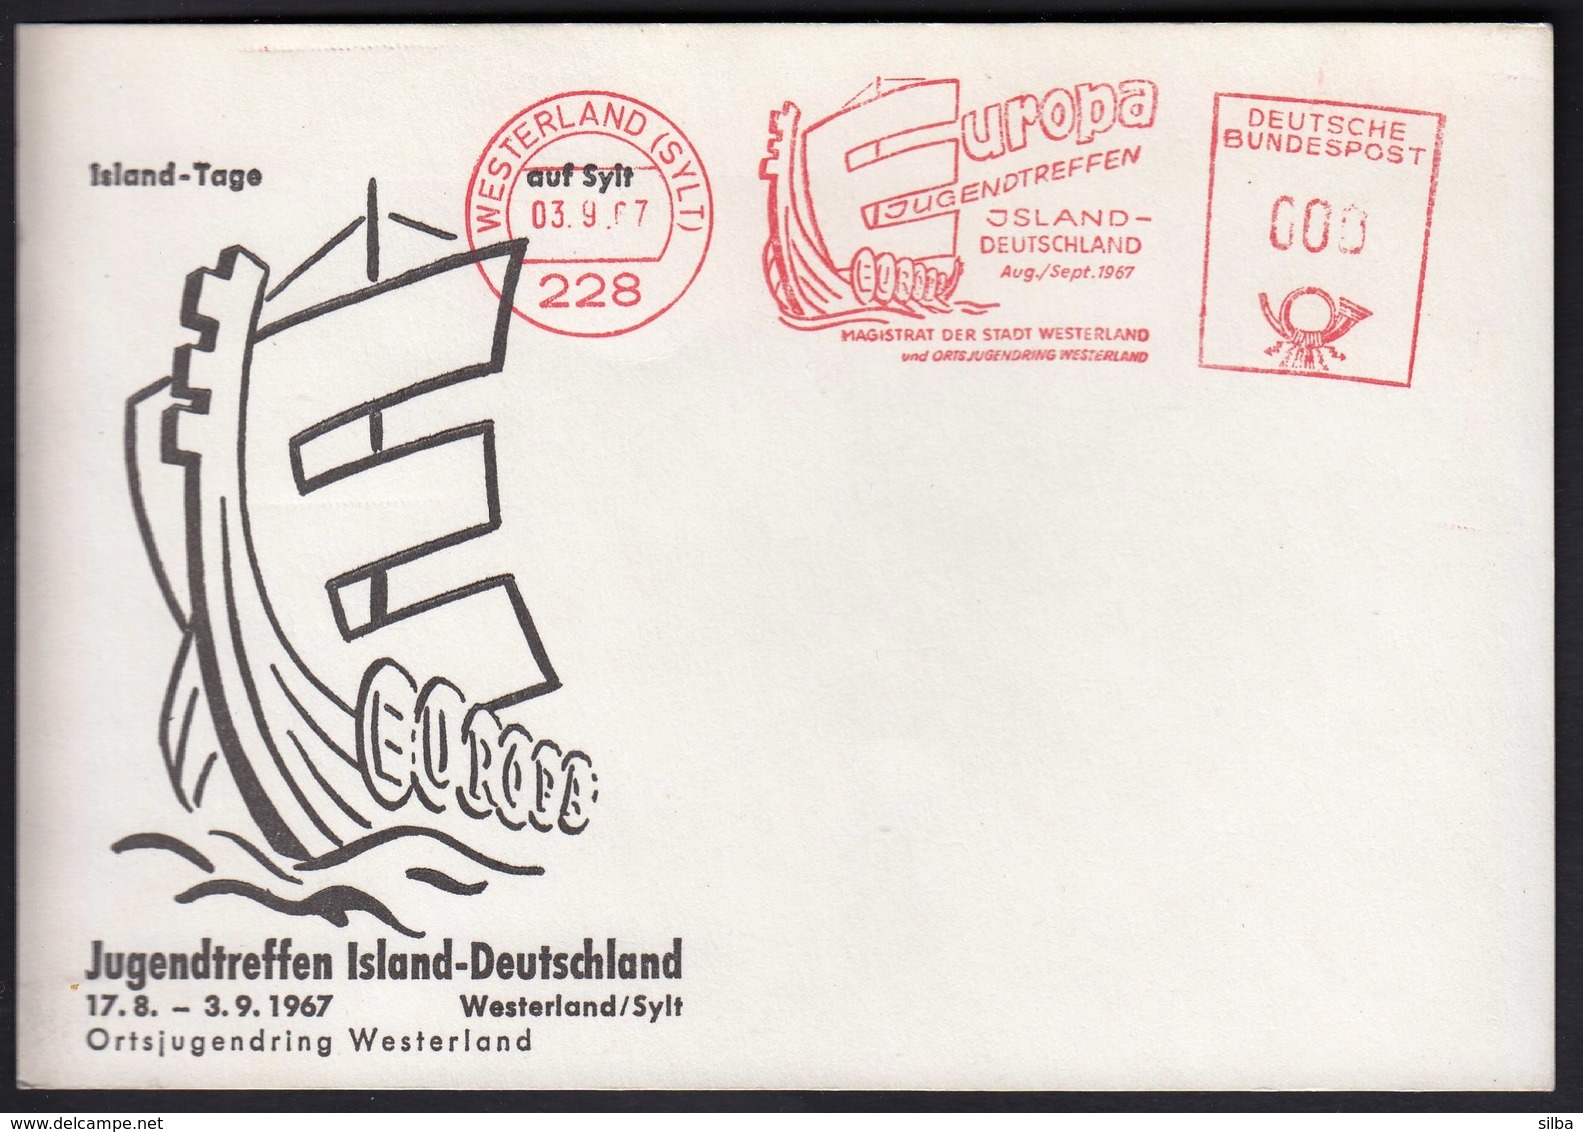 Germany Westerland 1967 / Europa Youth Meeting Island - Germany / Island Day In Sylt / Ship / Machine Stamp, EMA - Ideas Europeas